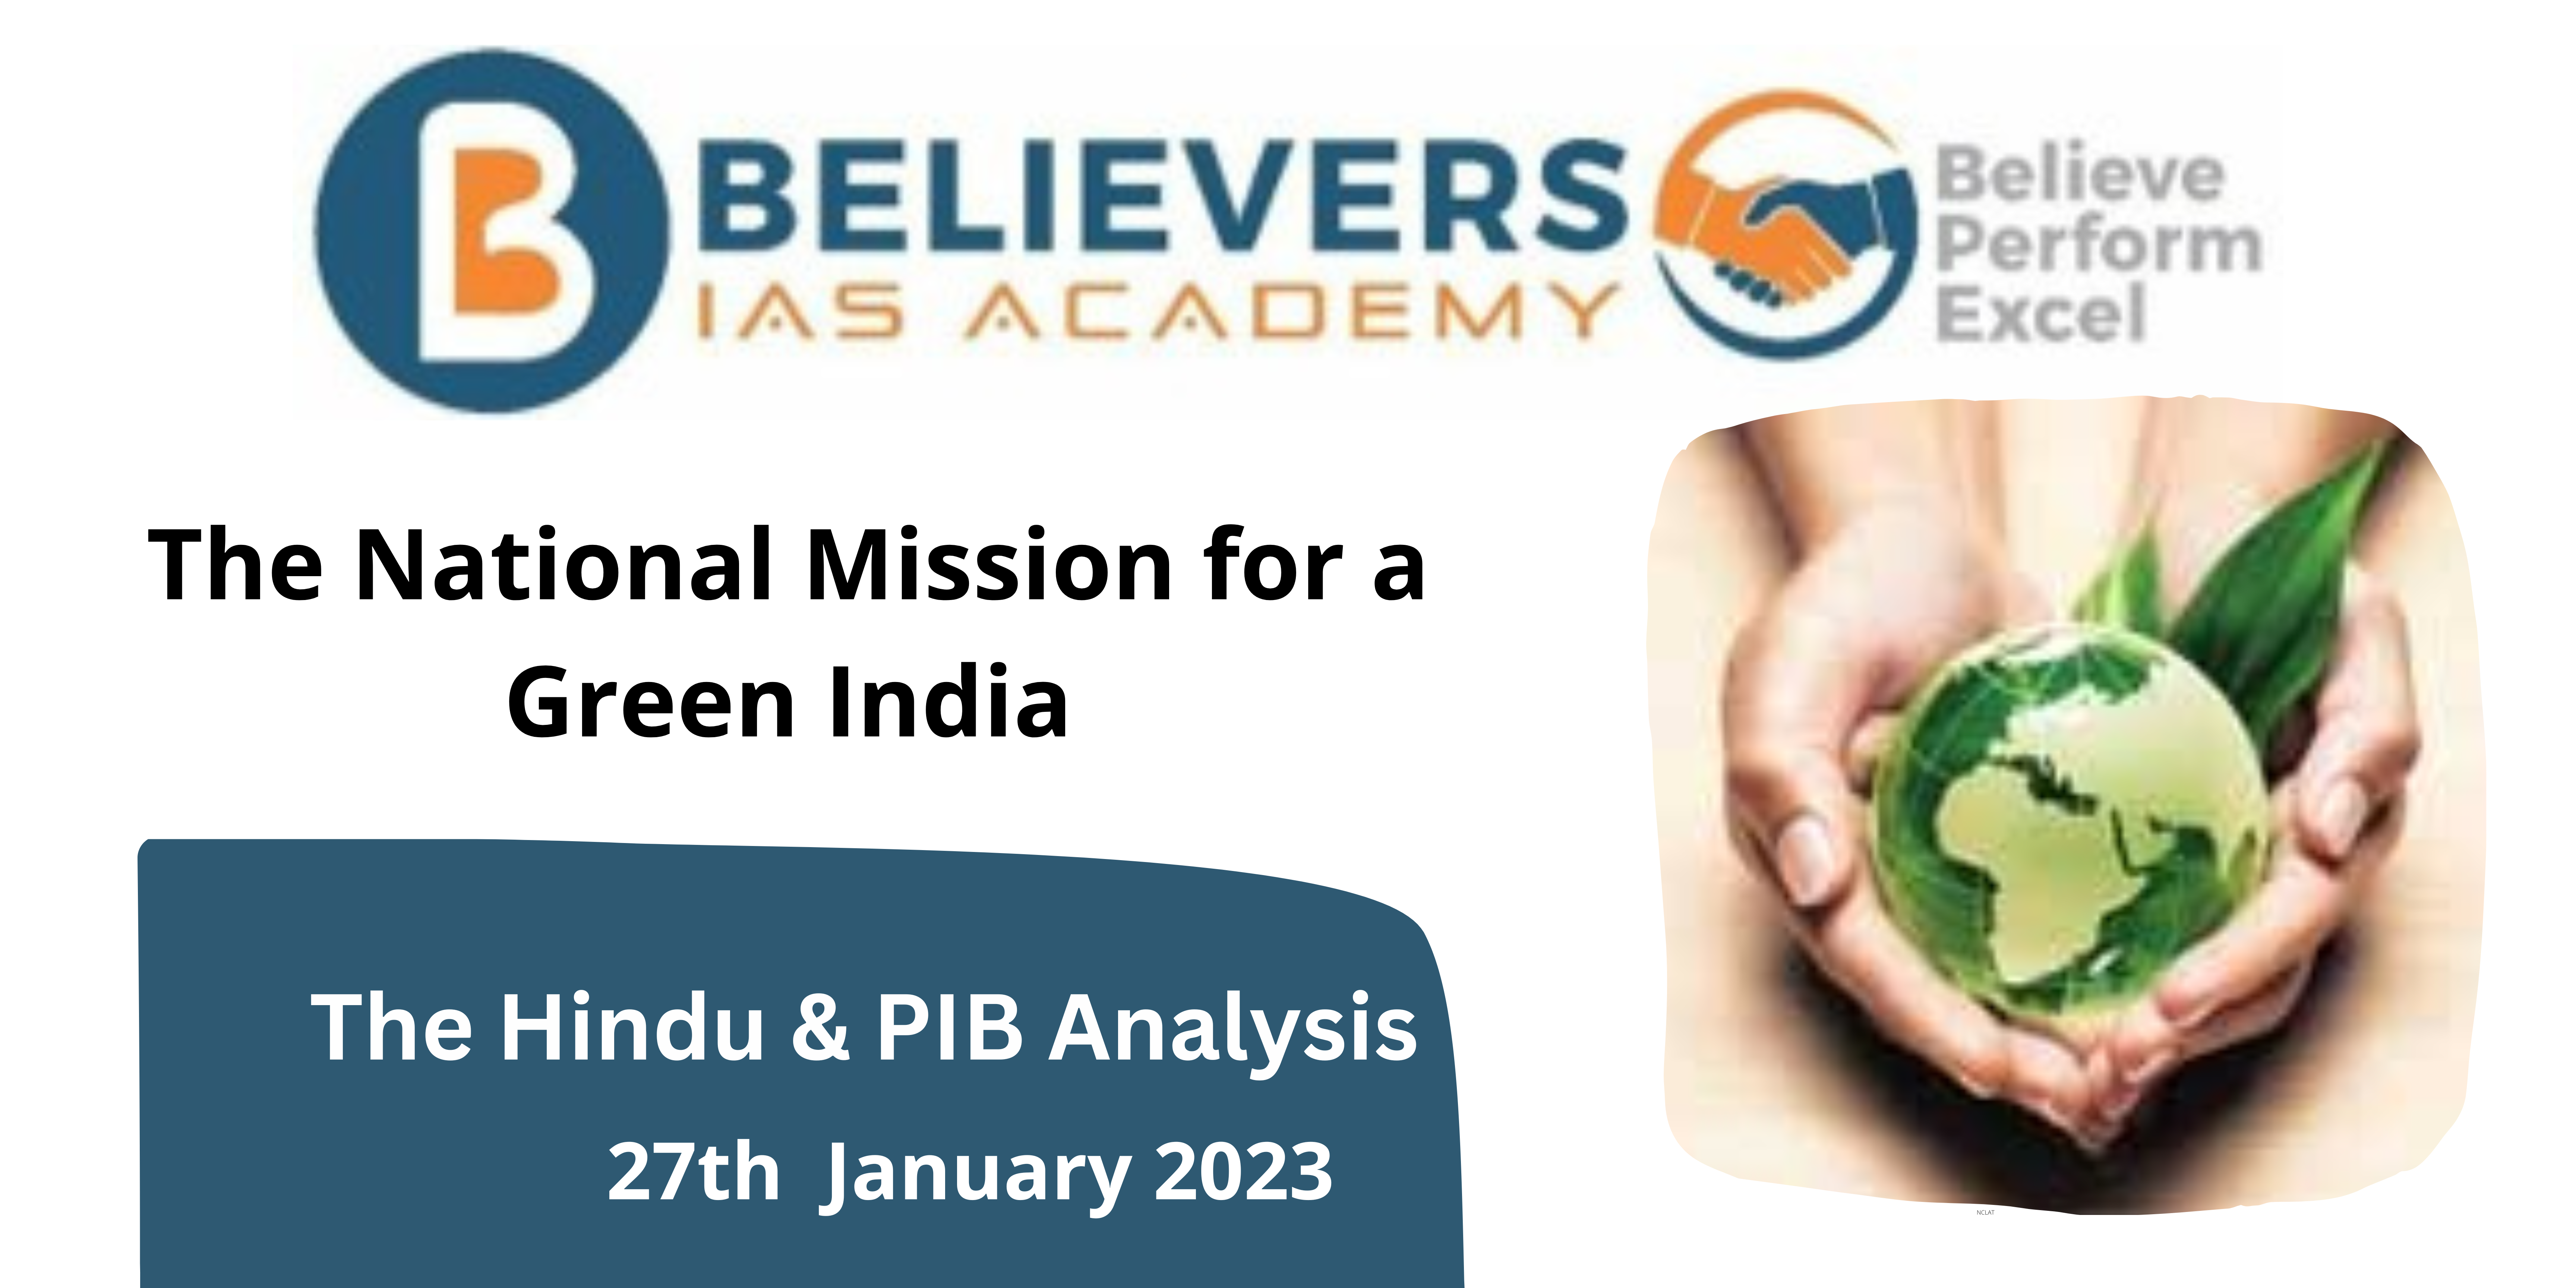 The National Mission for a Green India